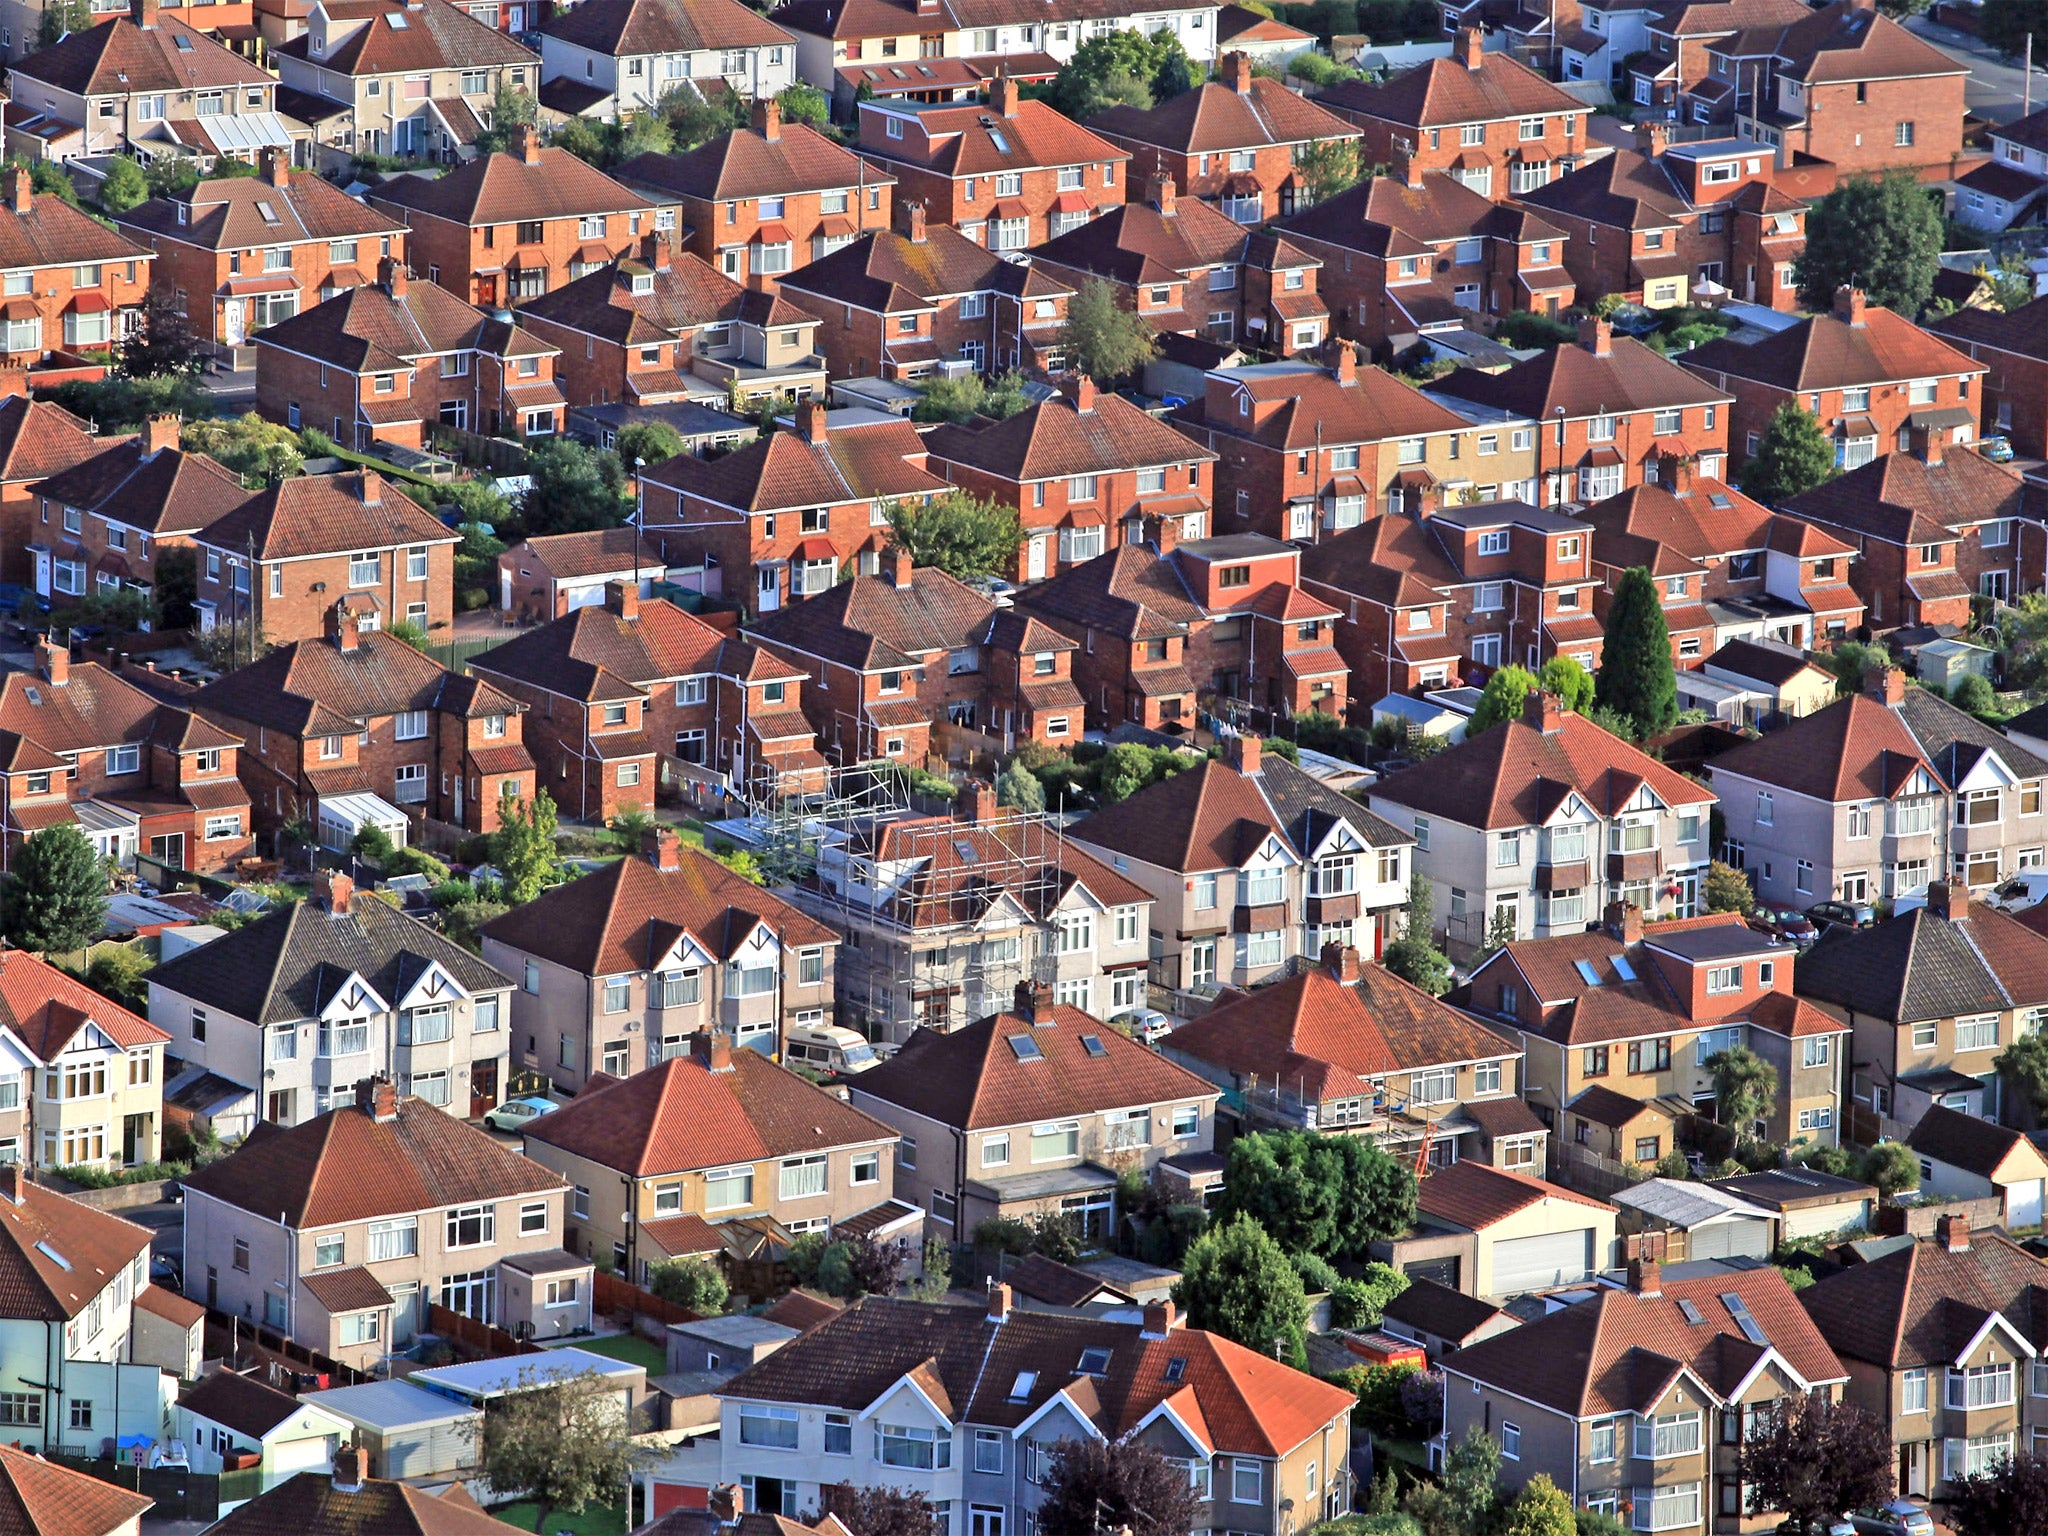 The foundation proposed that the Government sets up a scheme to help people avoid losing their homes